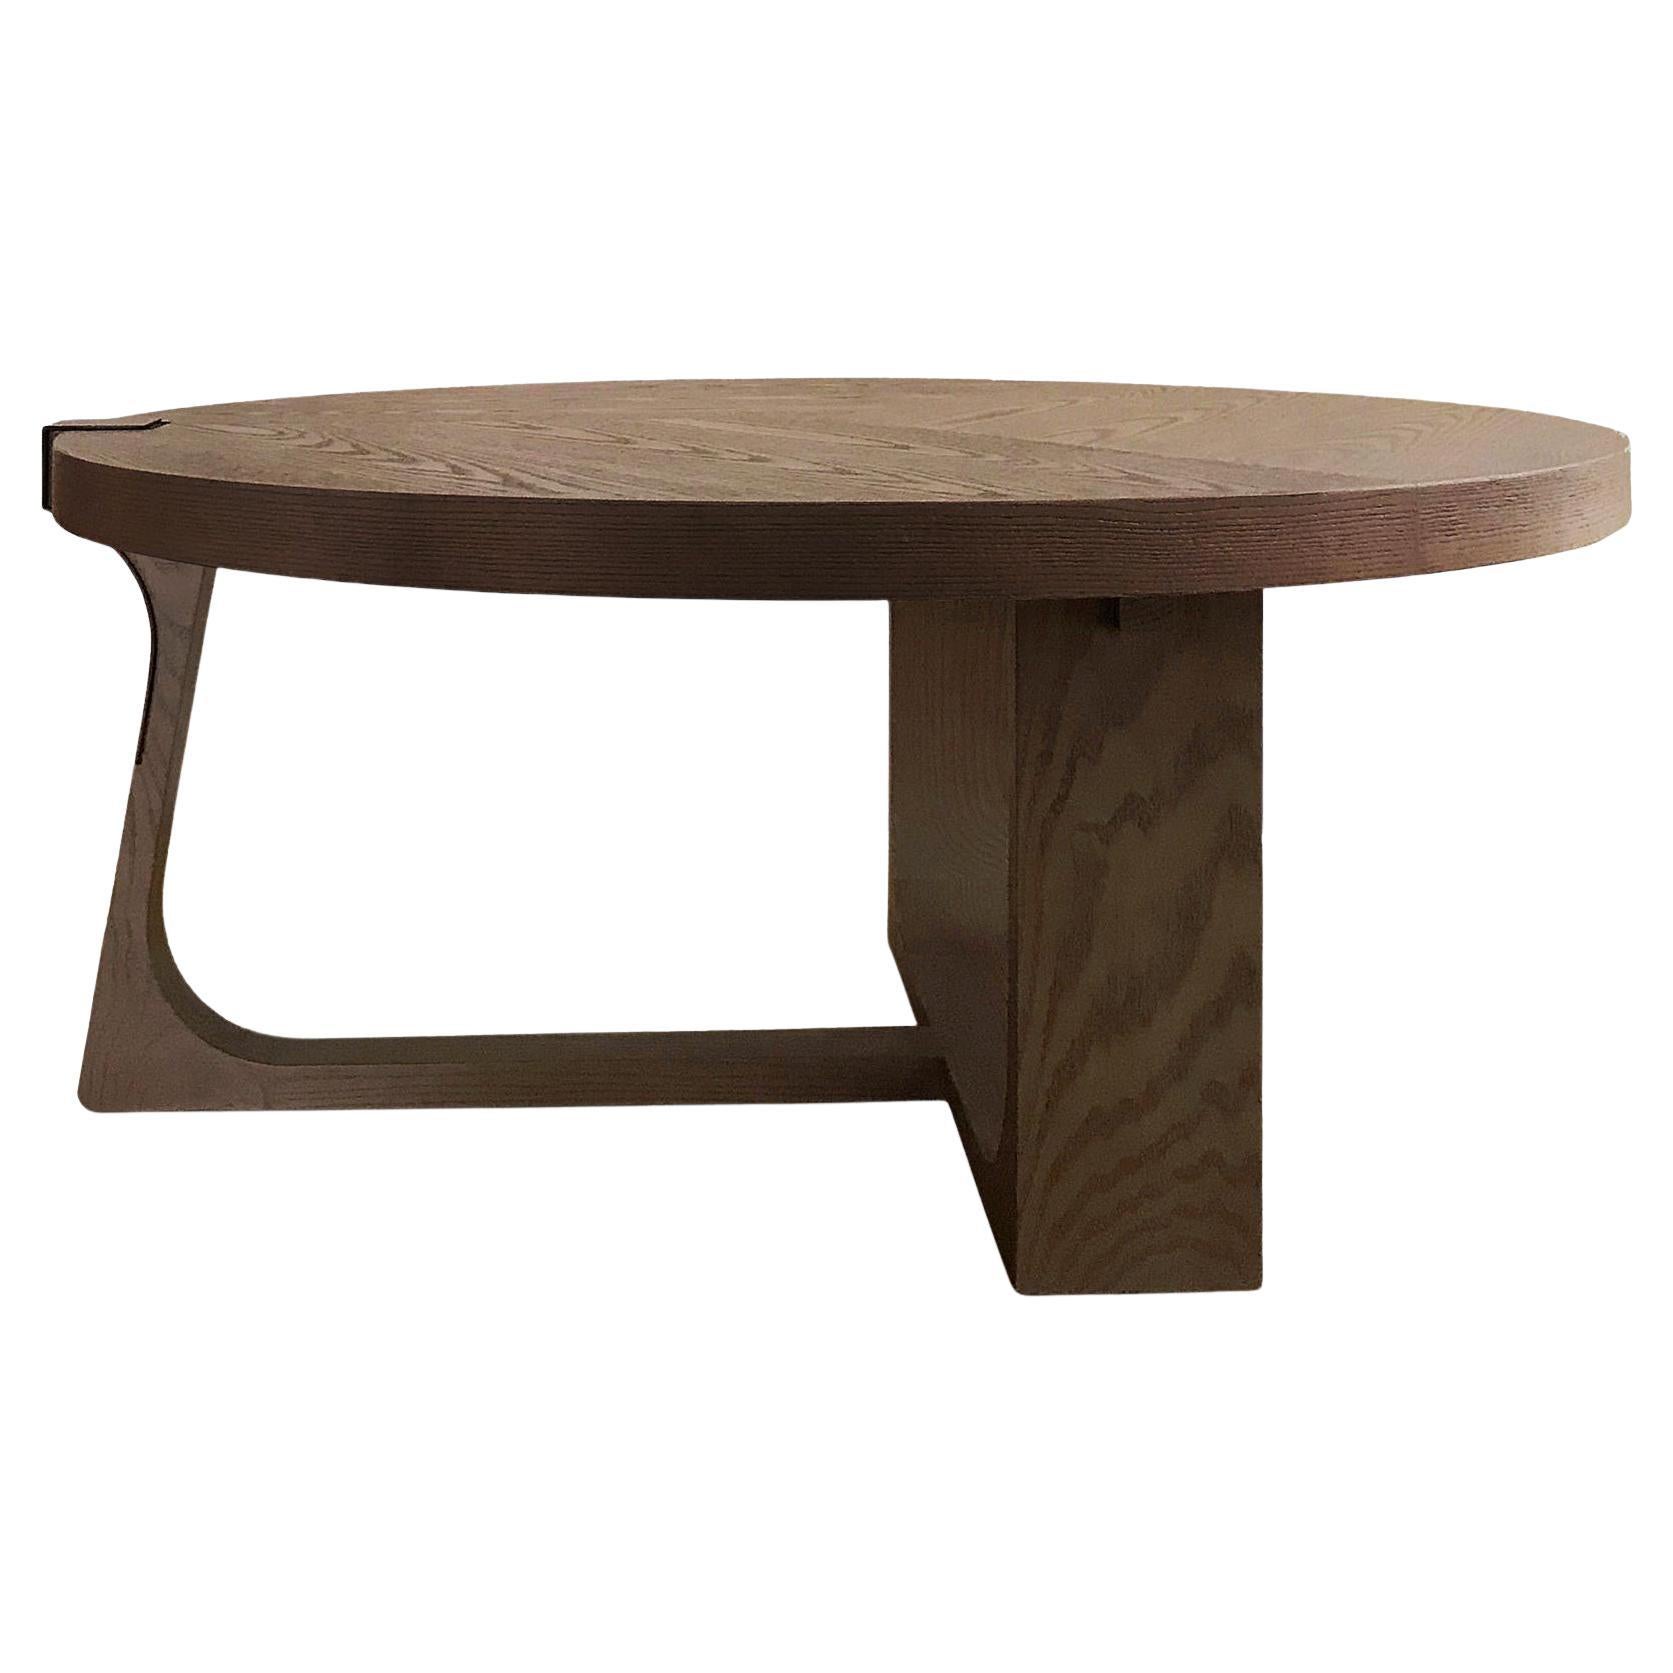 Low Coffee Table Interlock André Fu Living Home Oak New Modern For Sale